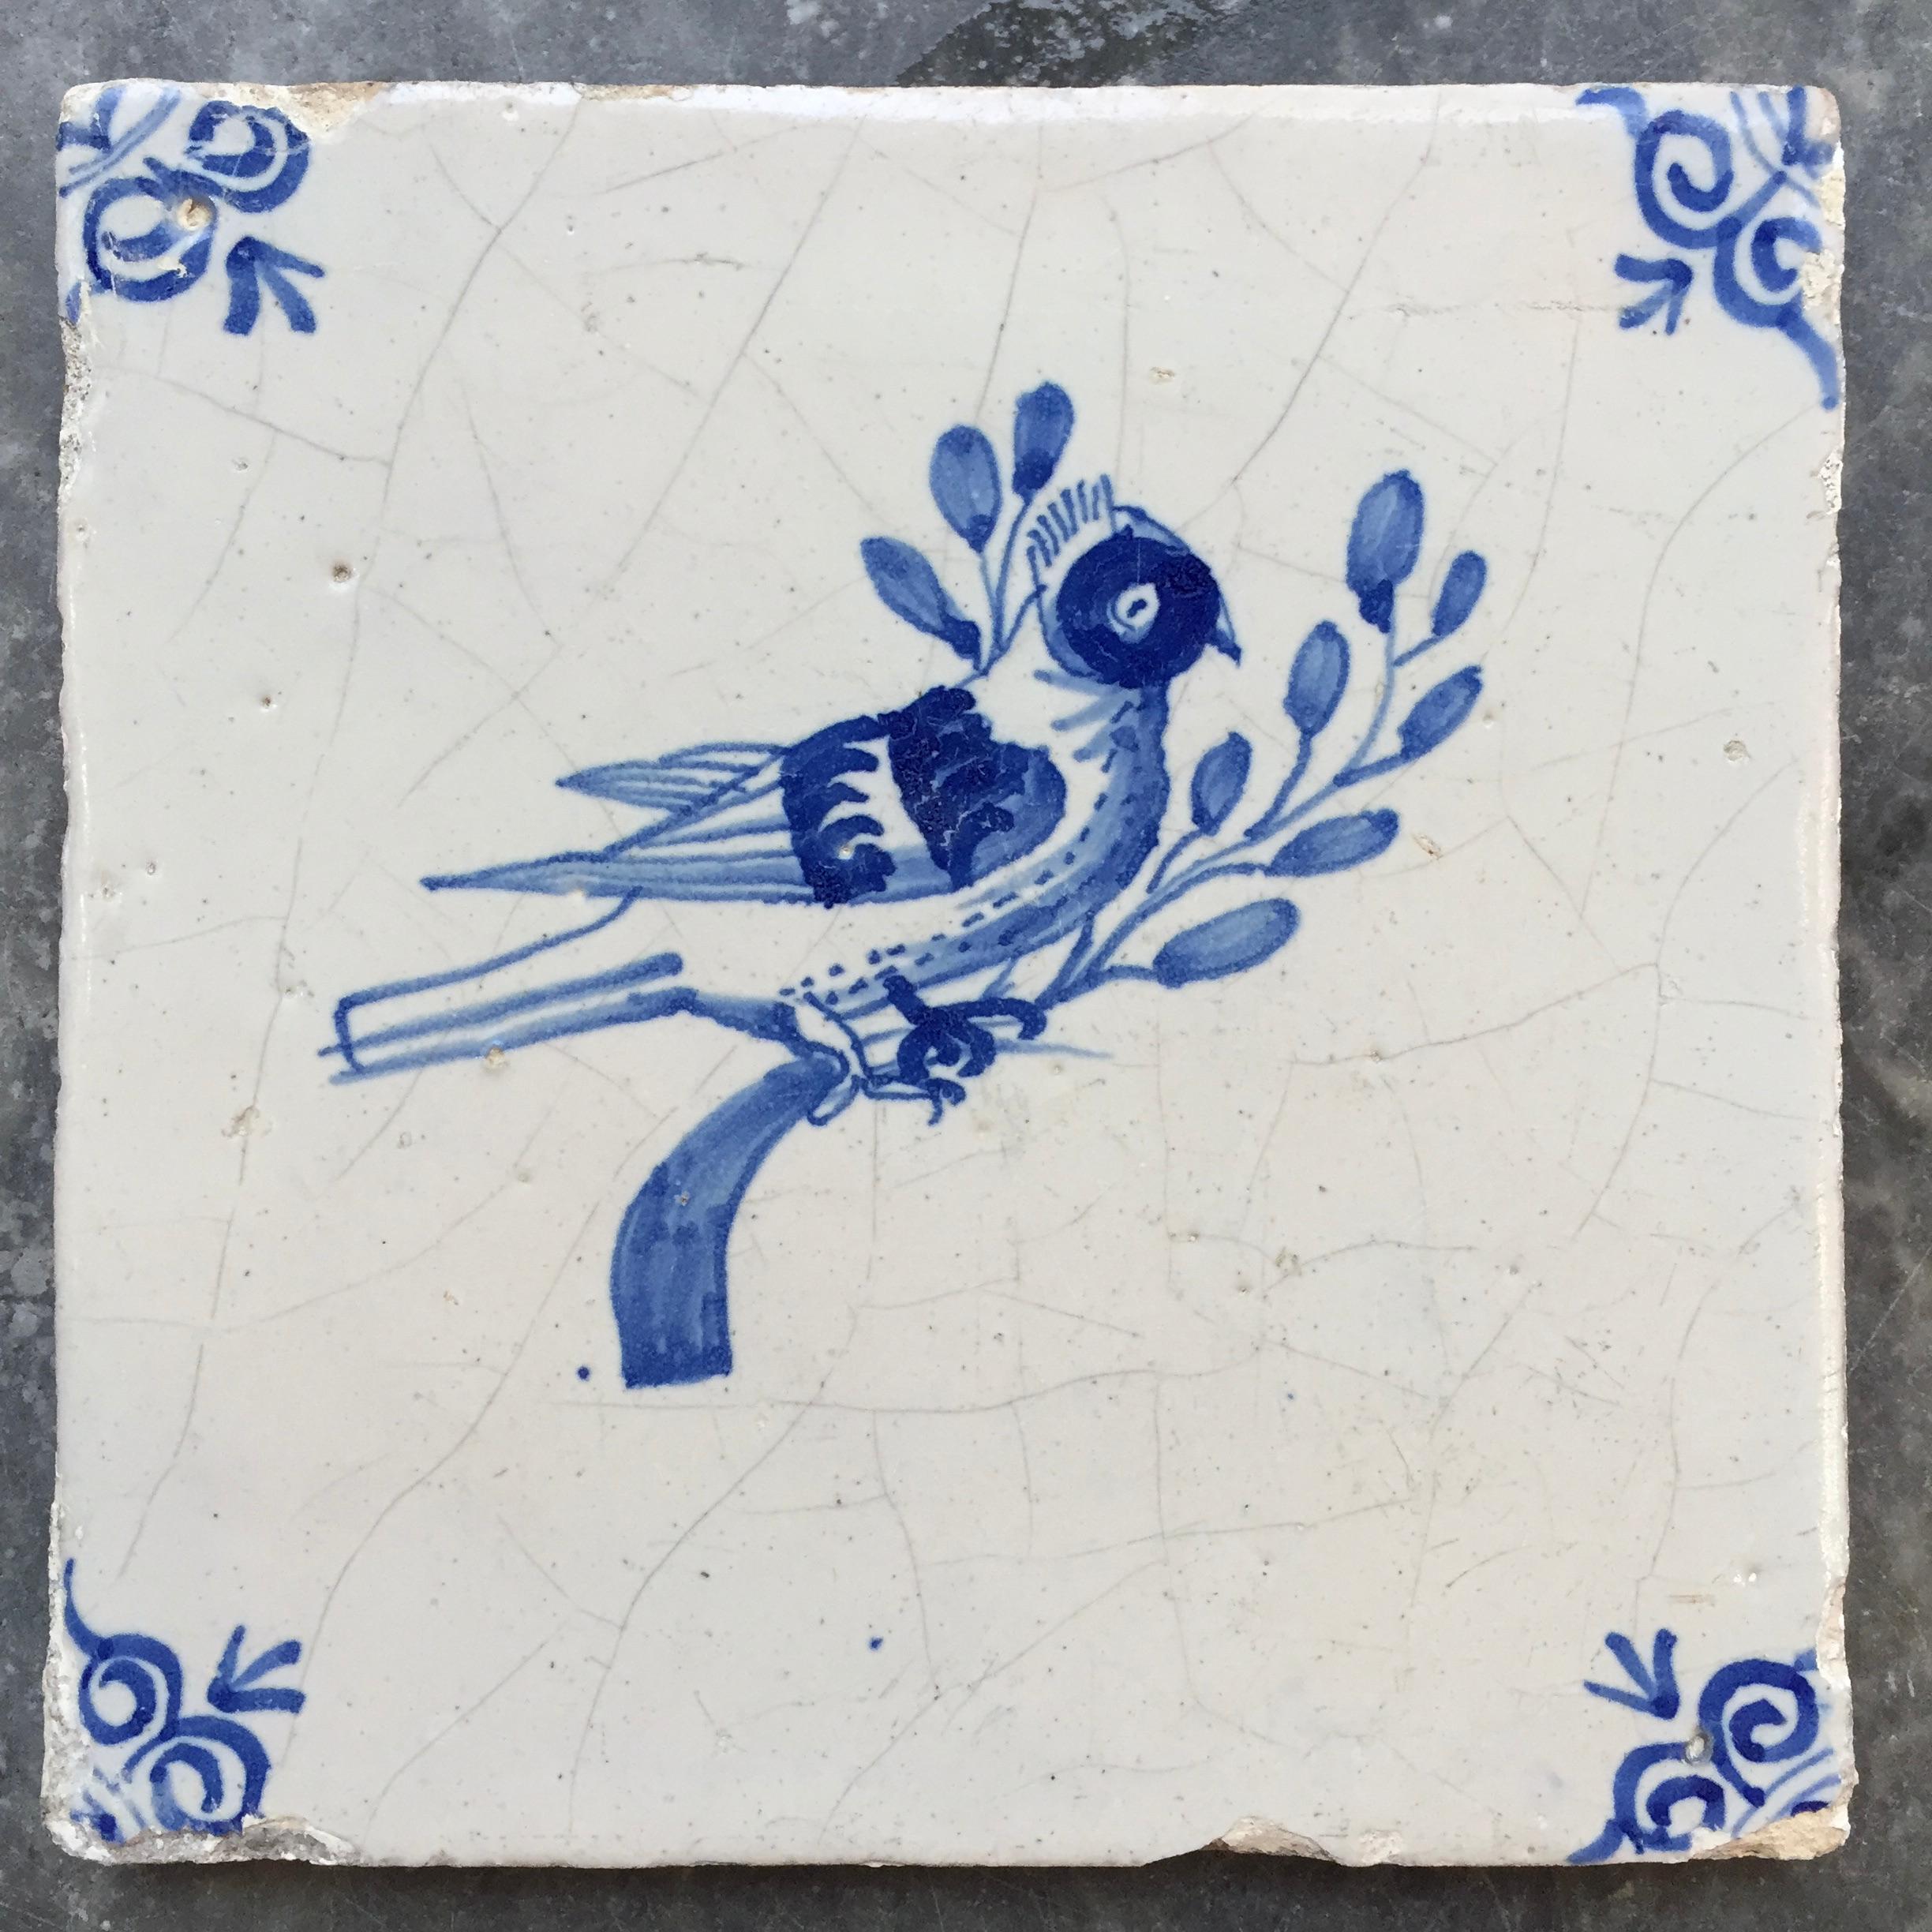 The Netherlands
Circa 1630 - 1660

A fine painted blue and white tile with a decoration of a bird on a branch.
With so-called oxheads as corner decoration.

A genuine collectible of approximately 400 years old.